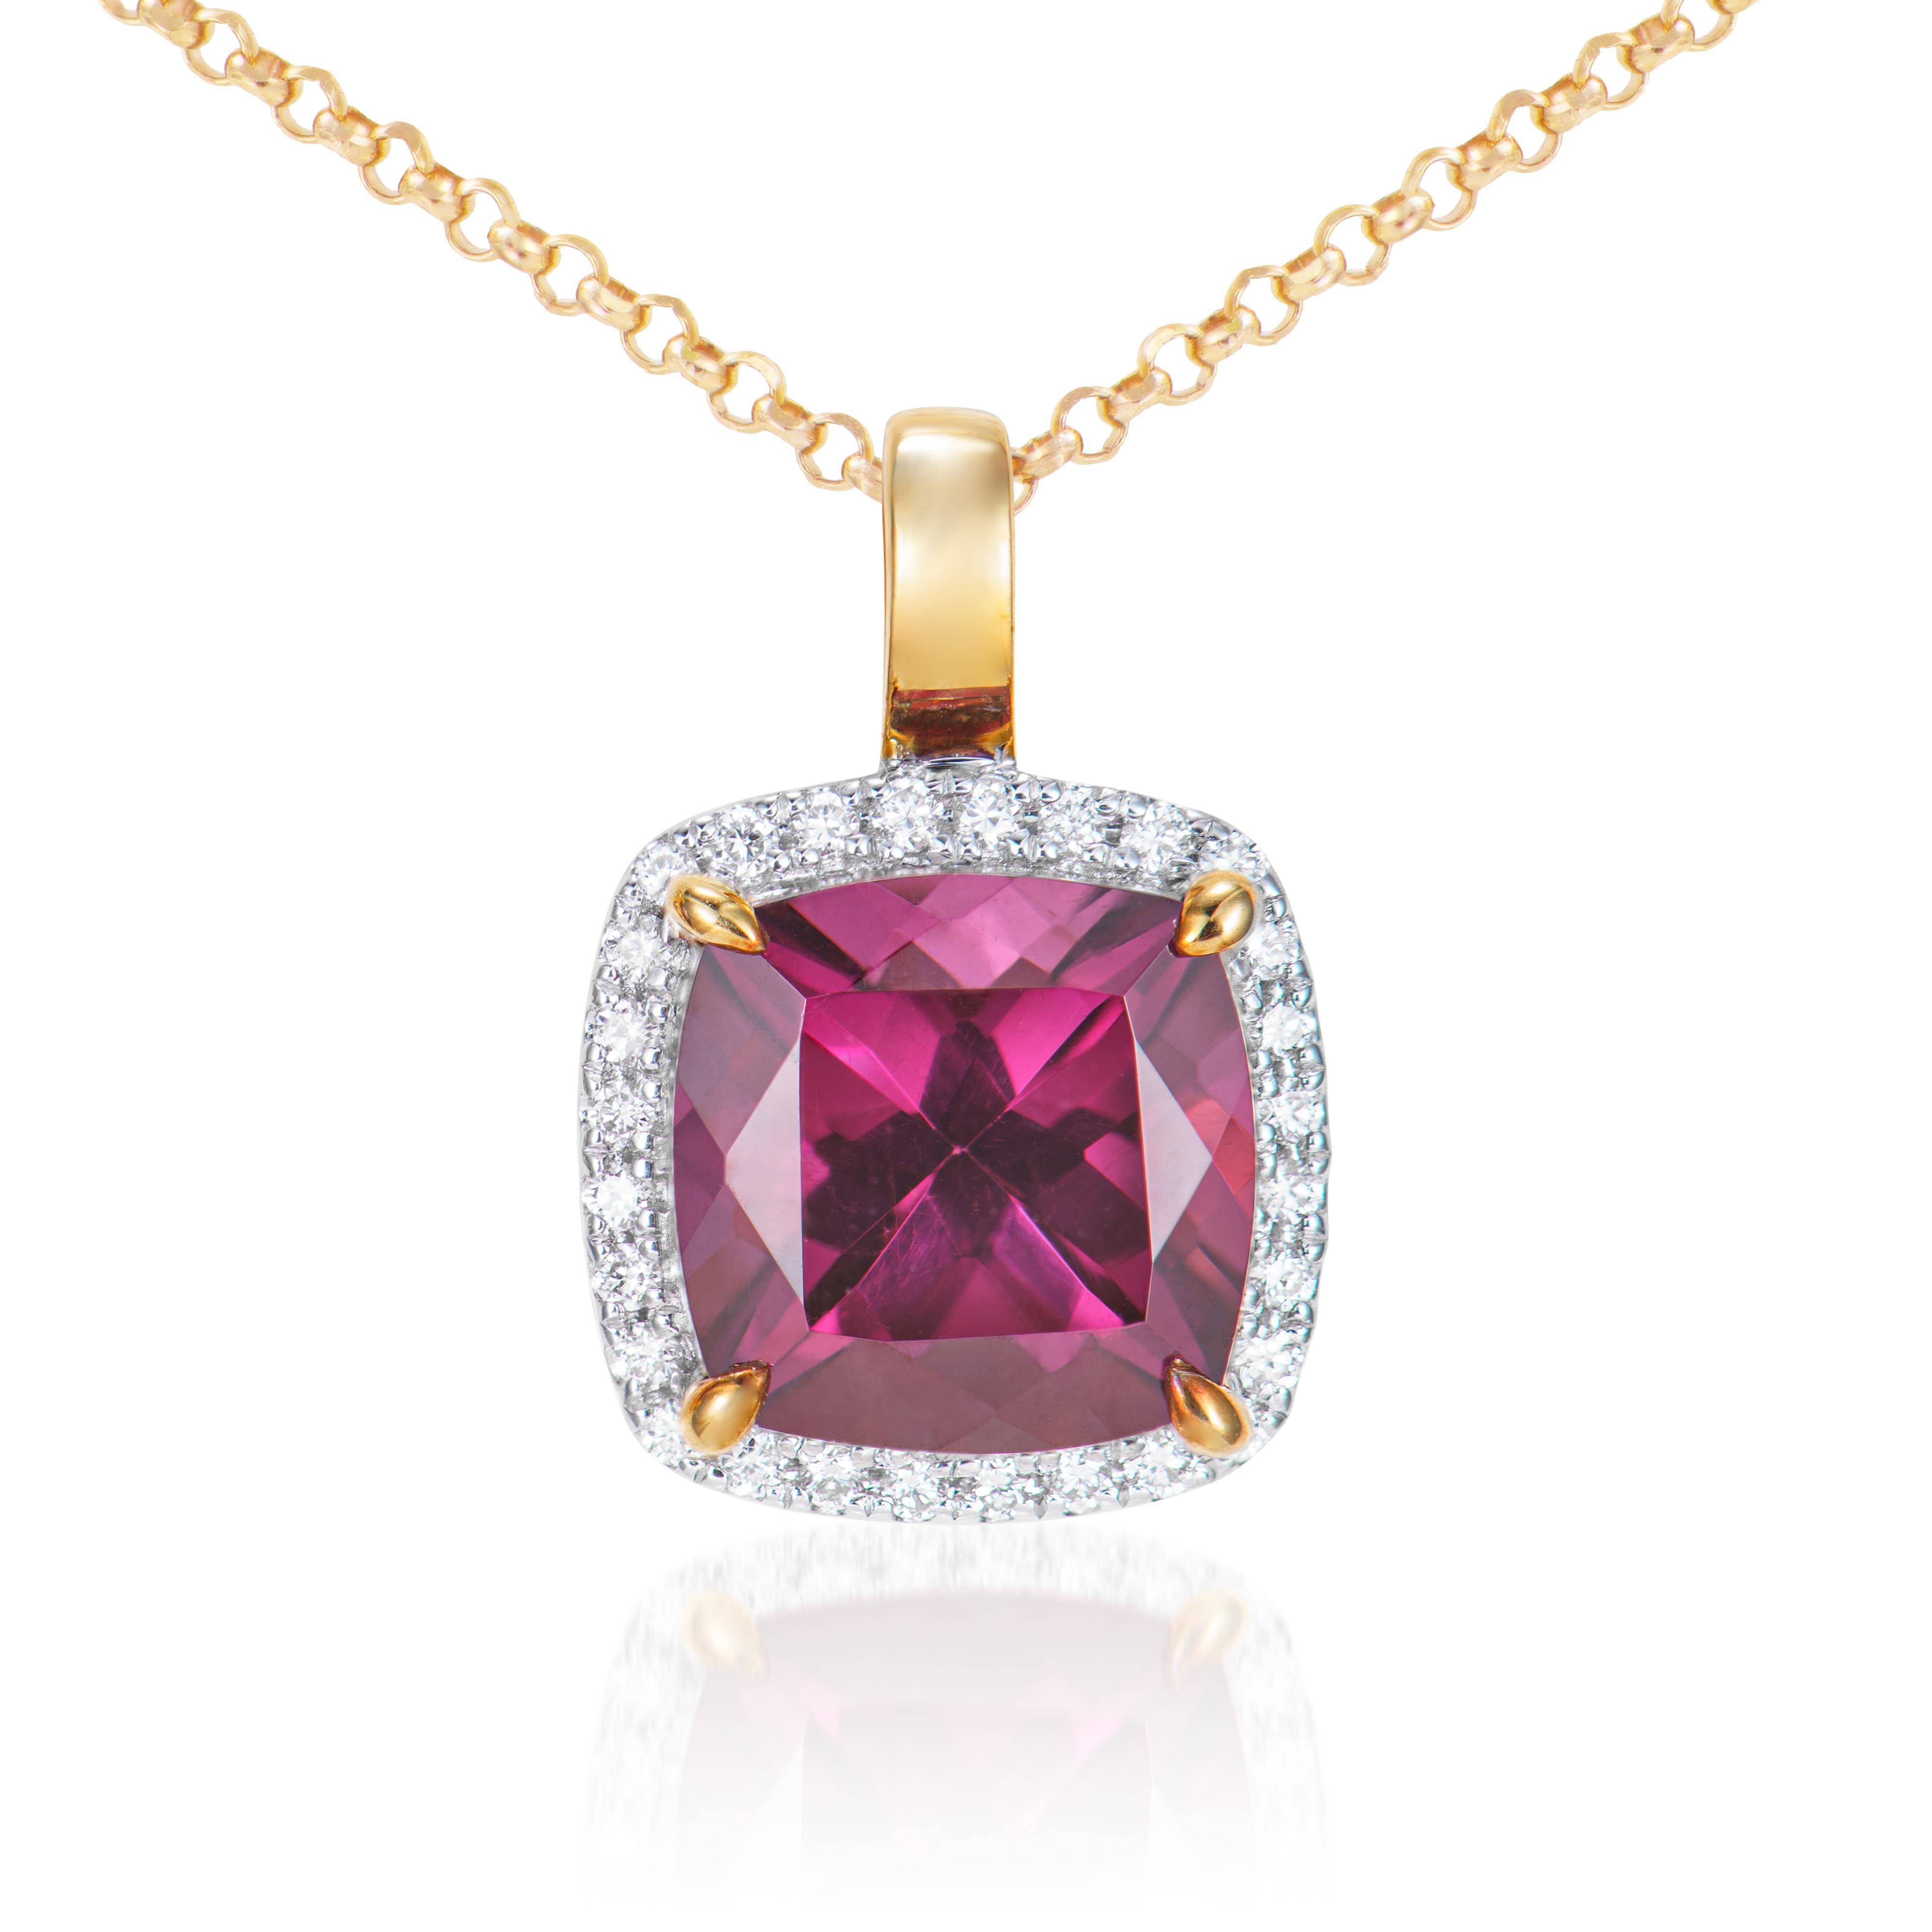 Contemporary 2.85 Carat Rhodolite Pendant in 18Karat Yellow Gold with White Diamond. For Sale